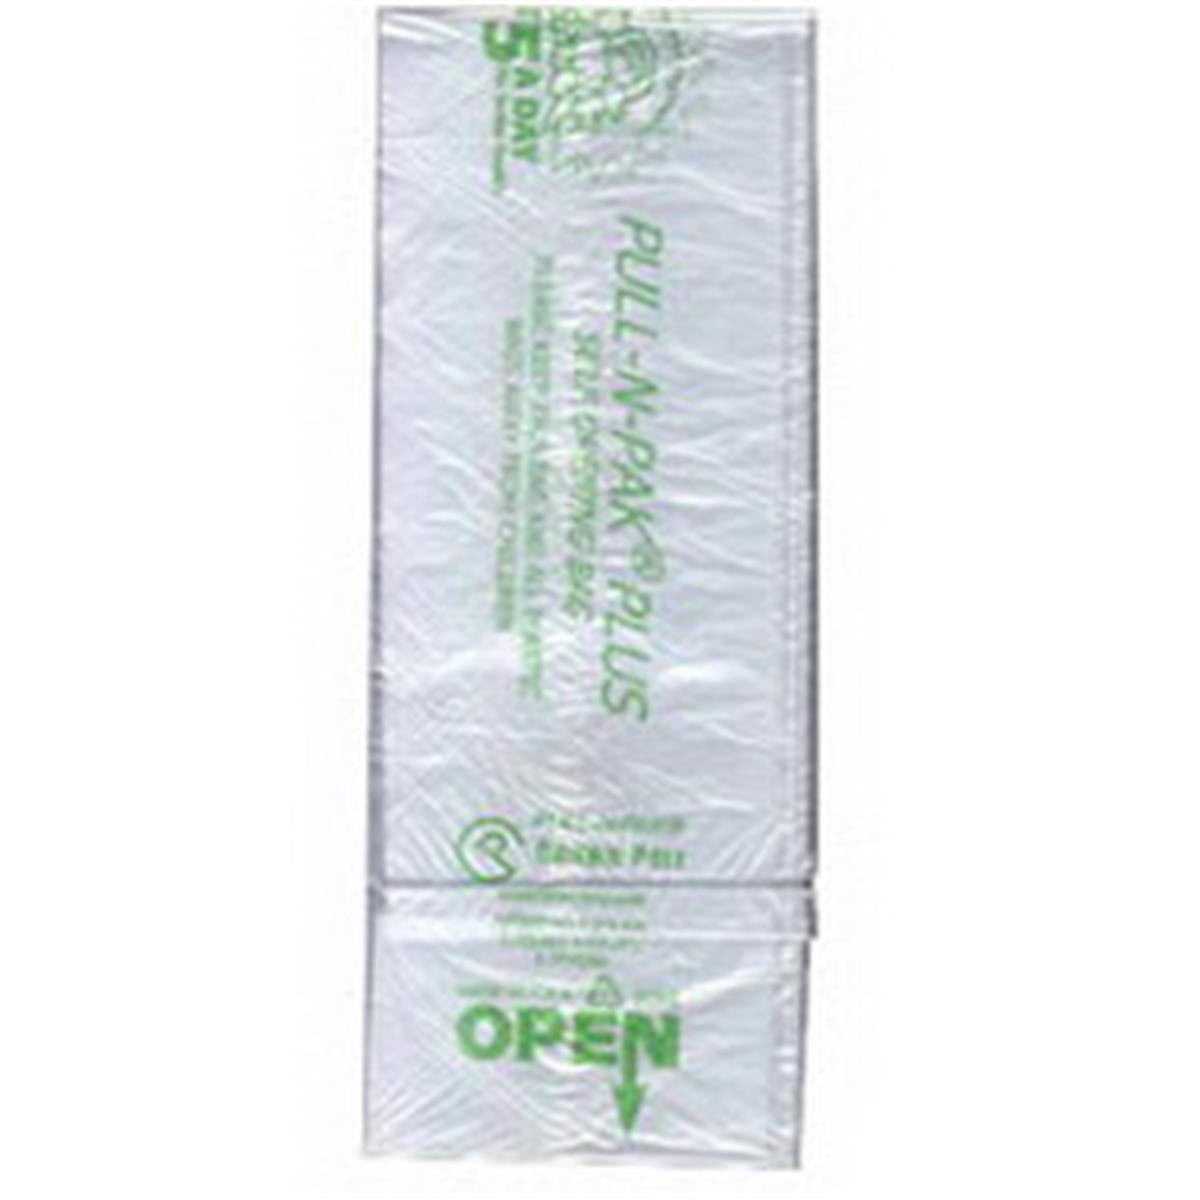 10215 Cpc 15 X 20 In. Clear Pull N Pak Self Opening Bag